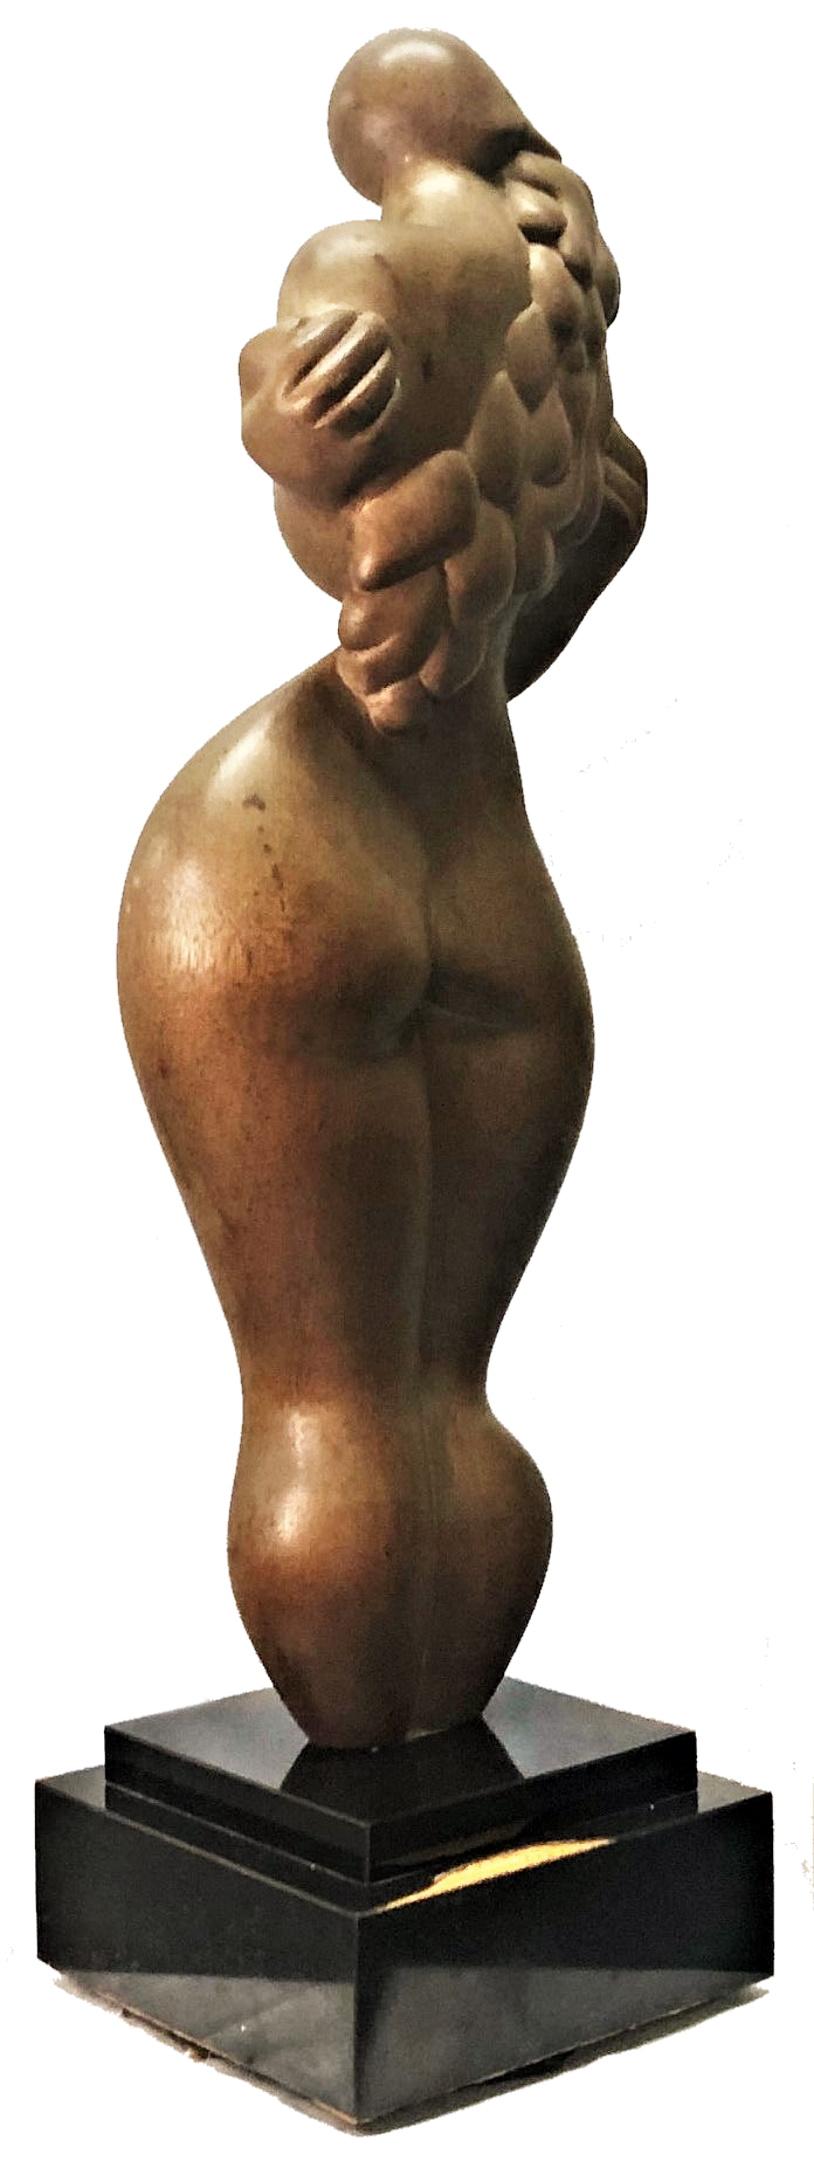 Self-Embrace, Mid-Century American Modern Wood Sculpture by Needle, Ca. 1960 For Sale 1